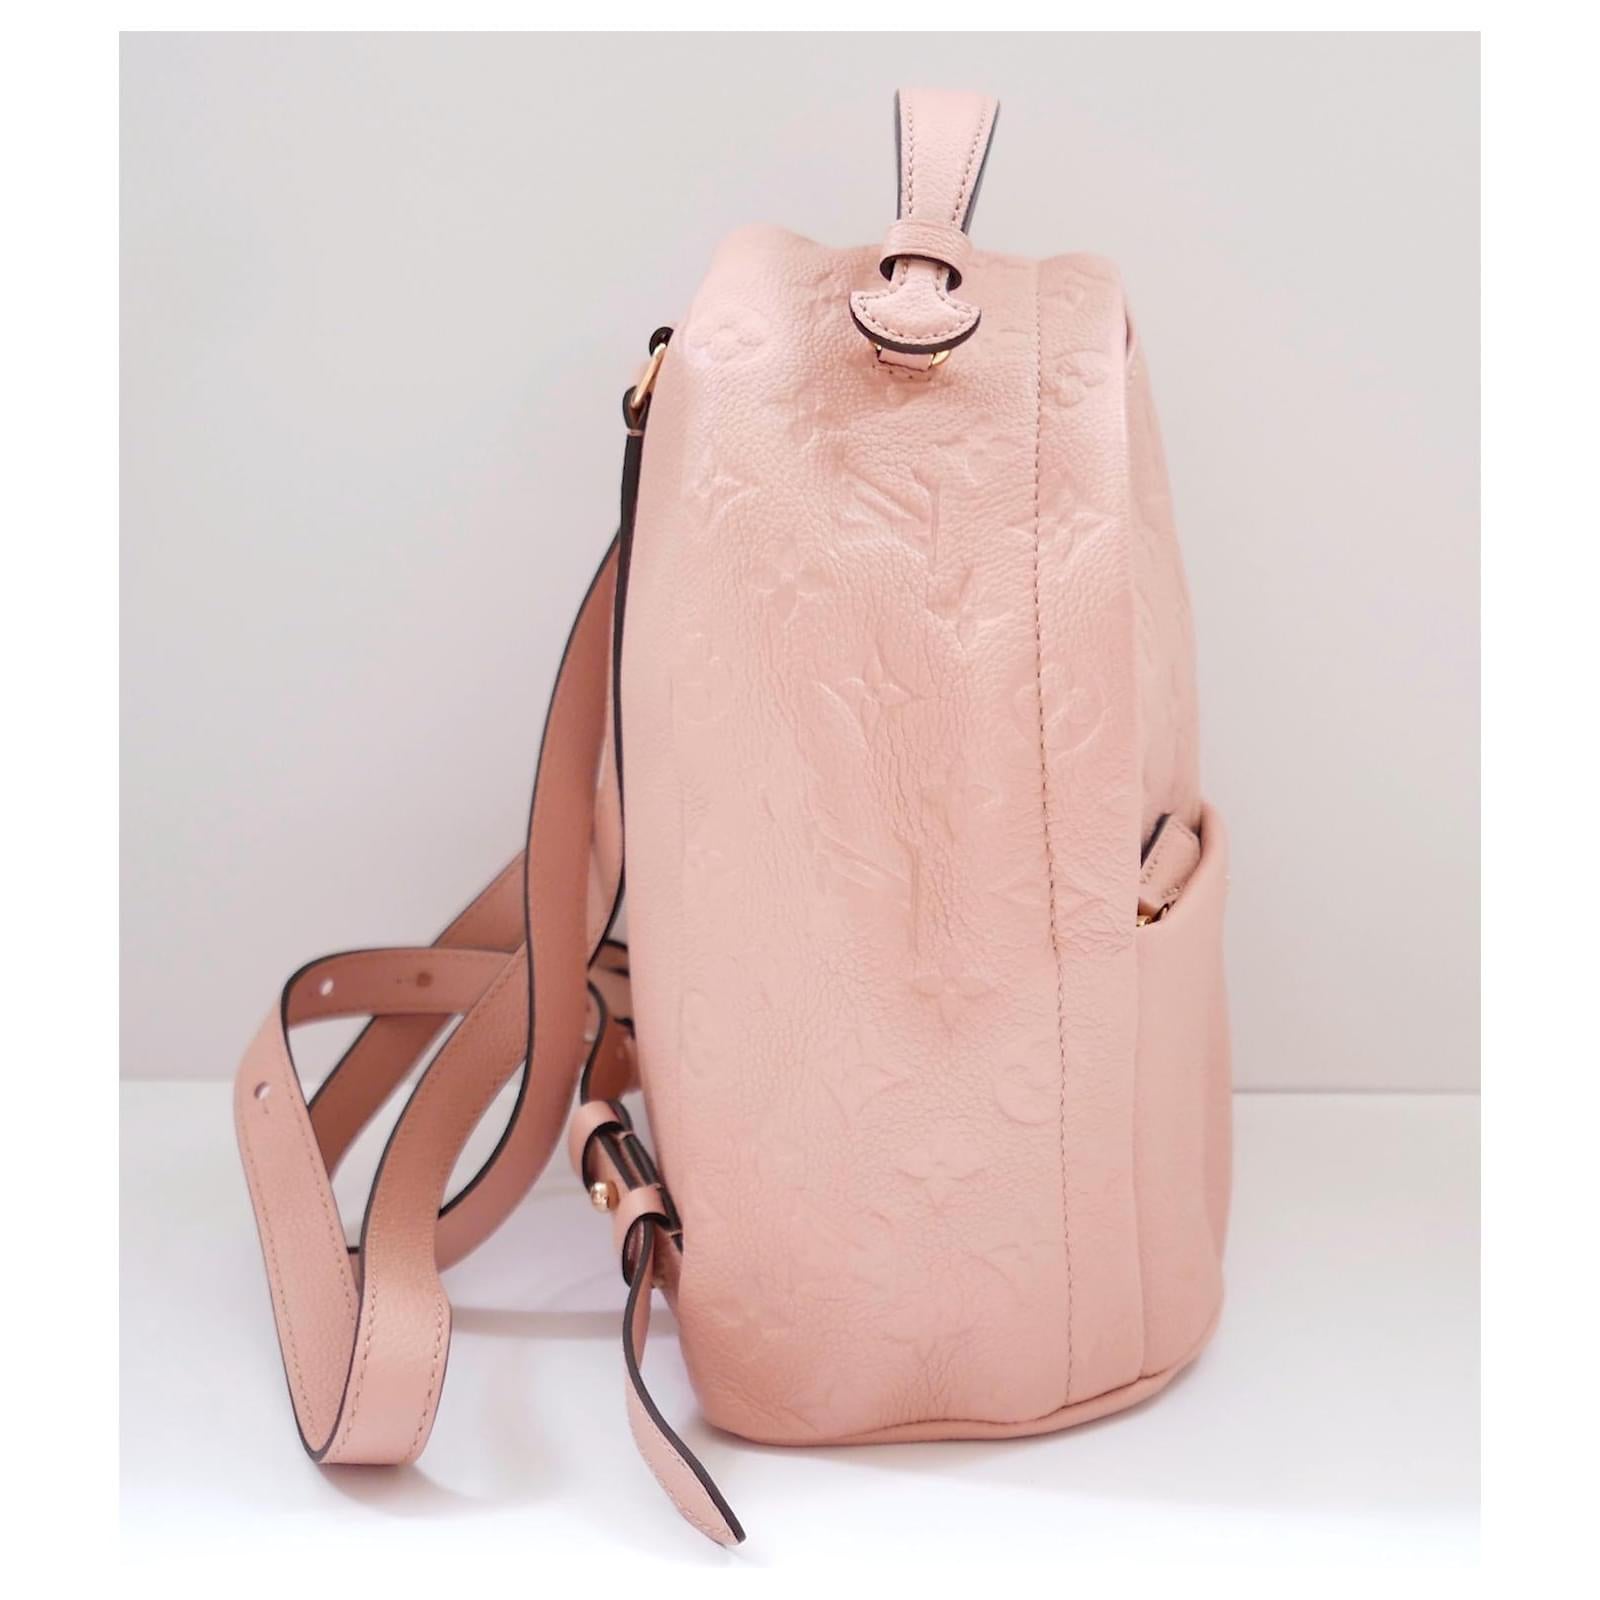 Adorable Louis Vuitton Sorbonne backpack - used once and comes with dustbag, care leaflet and sticker tag. Made from candy pink Monogram Empreinte leather, it has brass hardware, dual adjustable straps, front pocket and pink striped cotton lining.